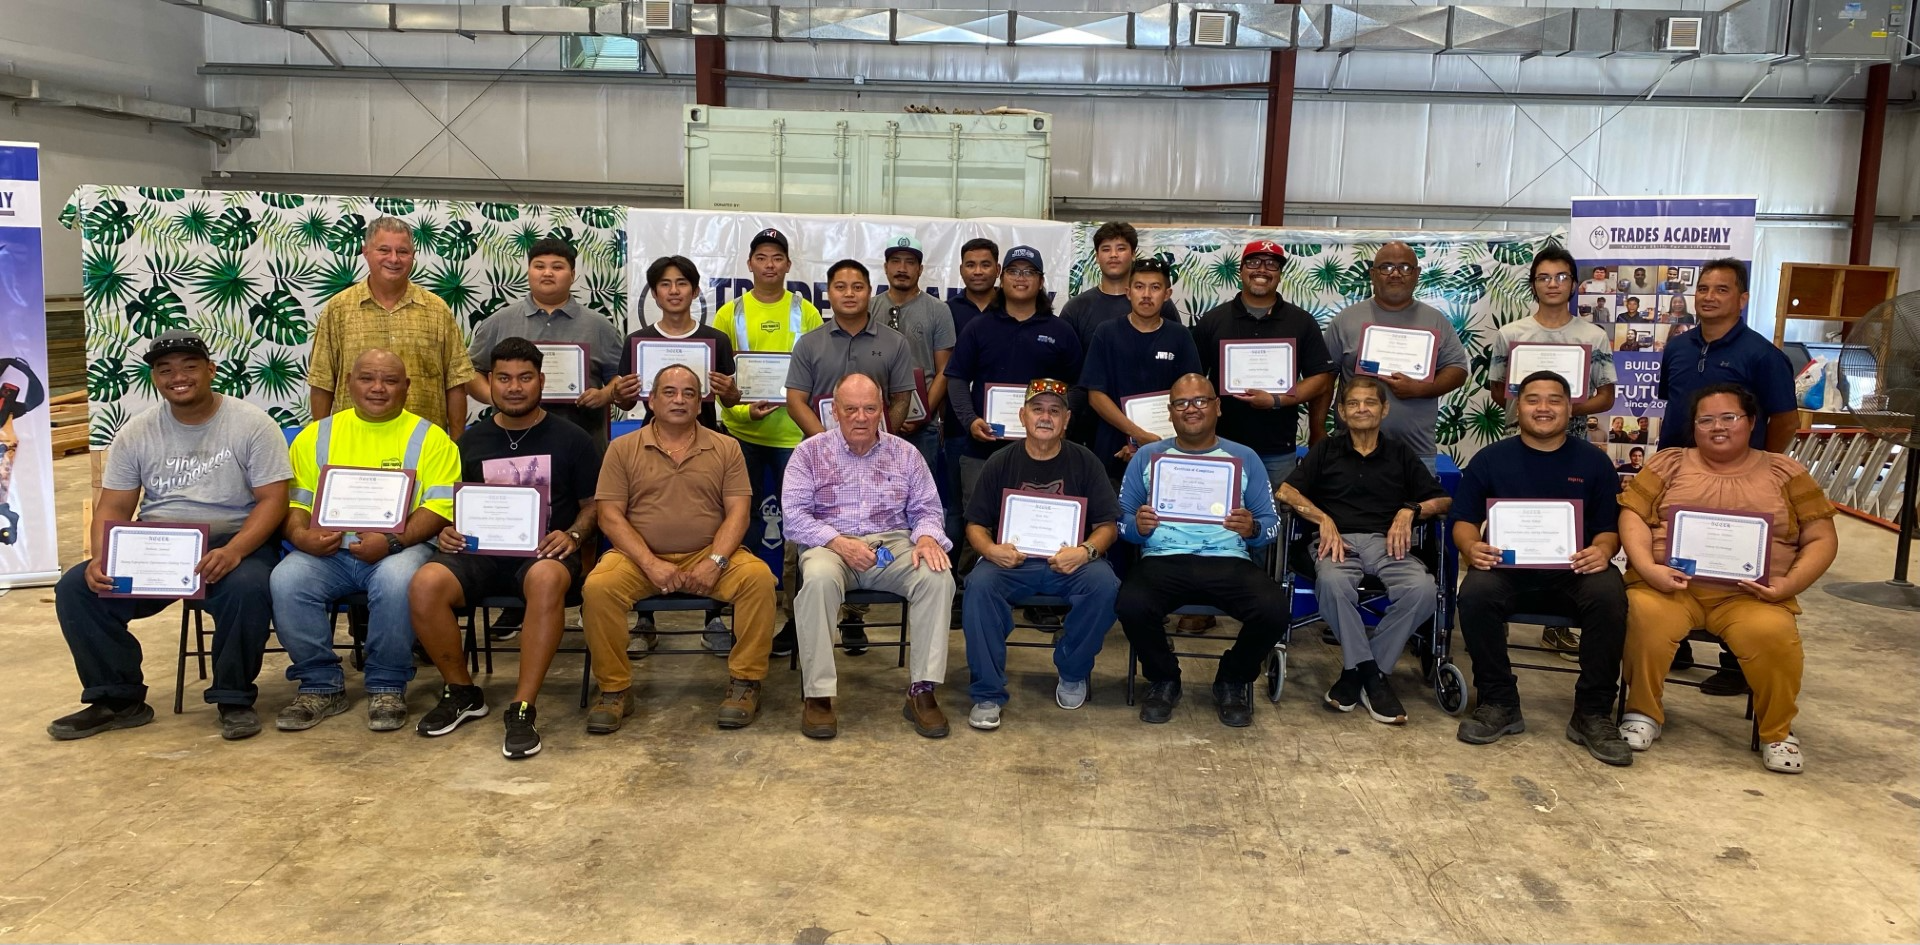 32 GCA Trades Academy students earn level completion certificates